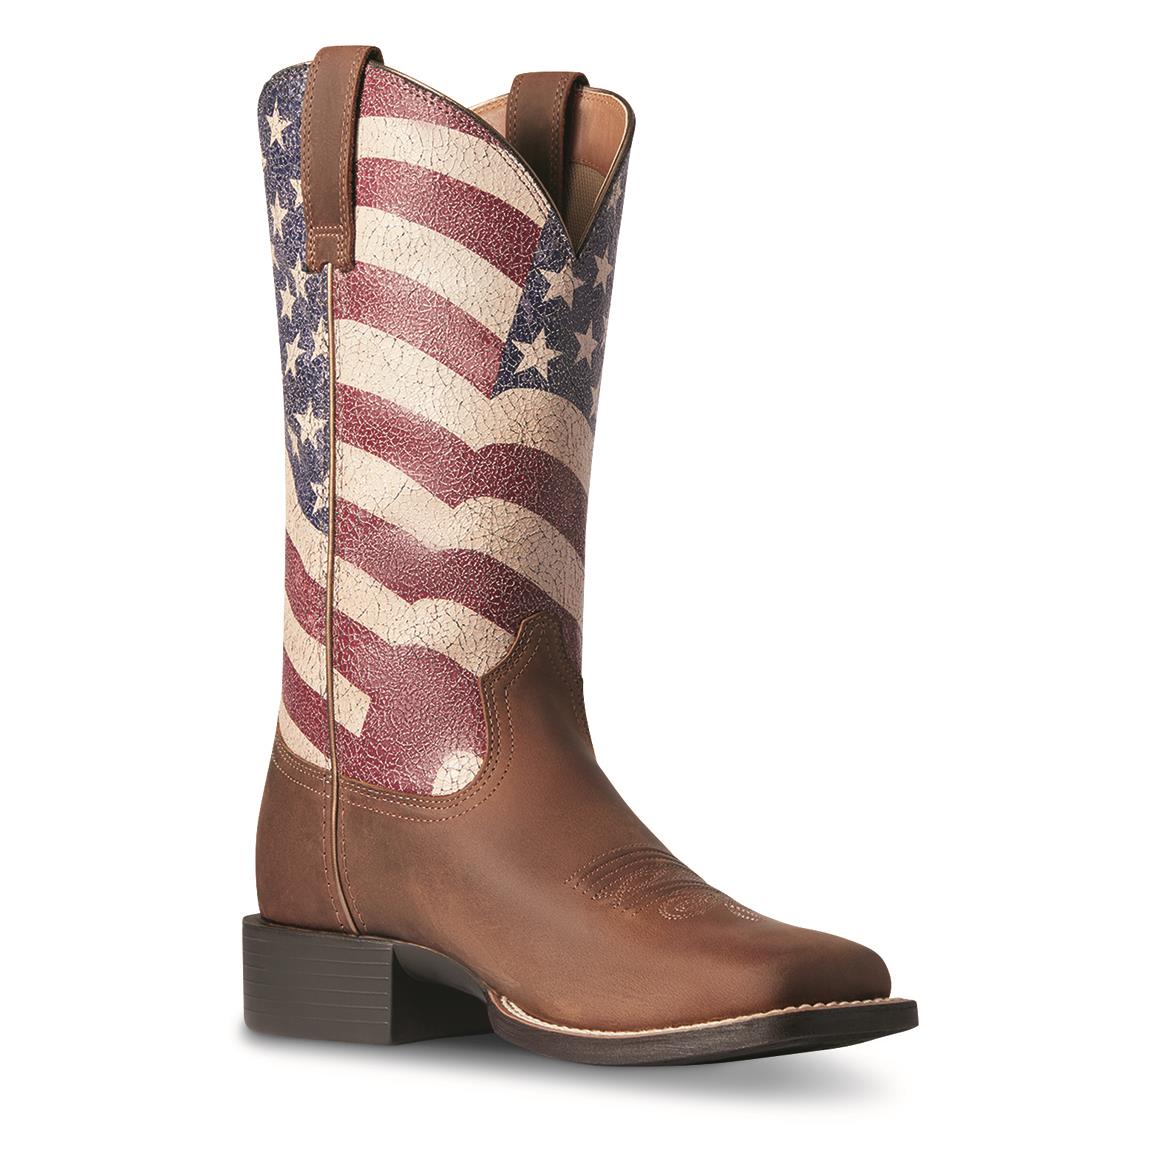 Ariat Women's Round Up Patriot Western Boots, Distressed Brown/american Flag